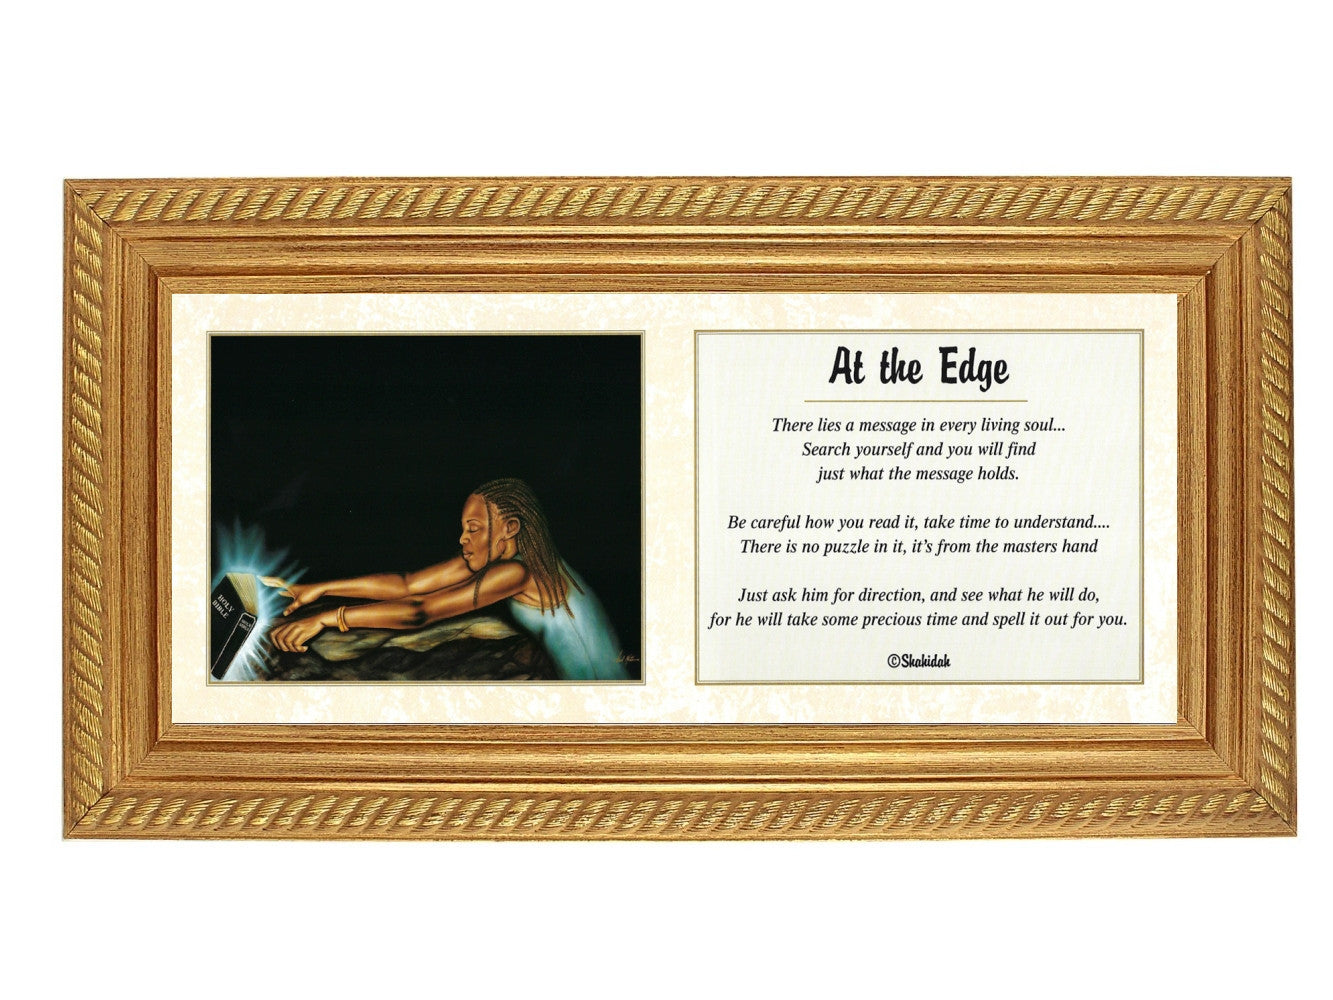 2 of 4: At the Edge (Female) by Fred Mathews and Shahidah (Gold Frame)